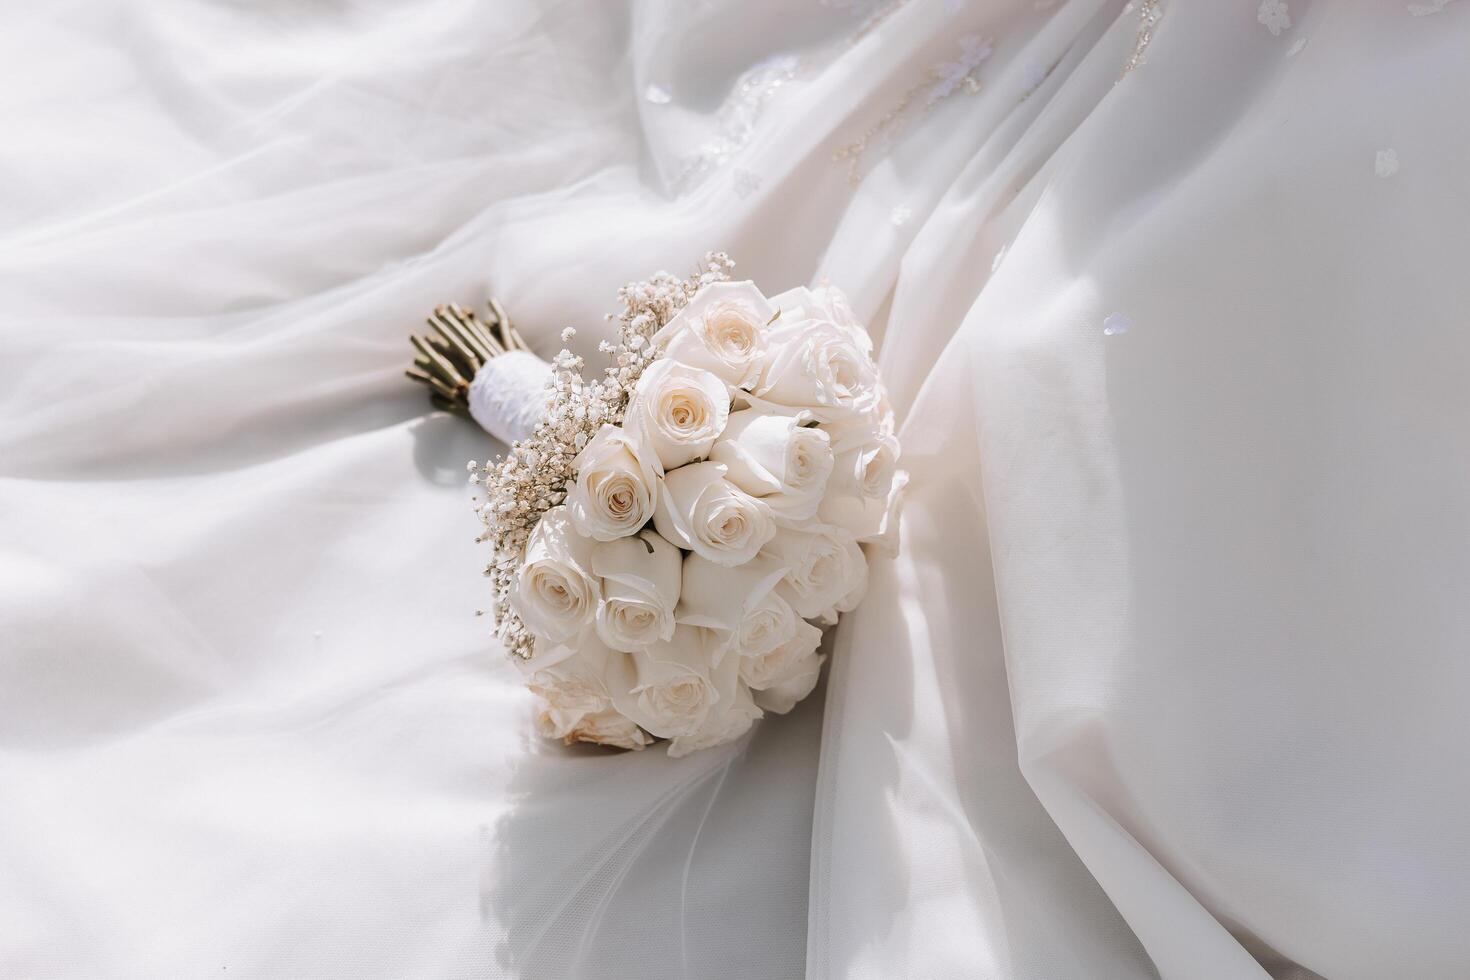 an elegant and beautiful wedding bouquet of white flowers lies on the bride's white dress. High quality photo